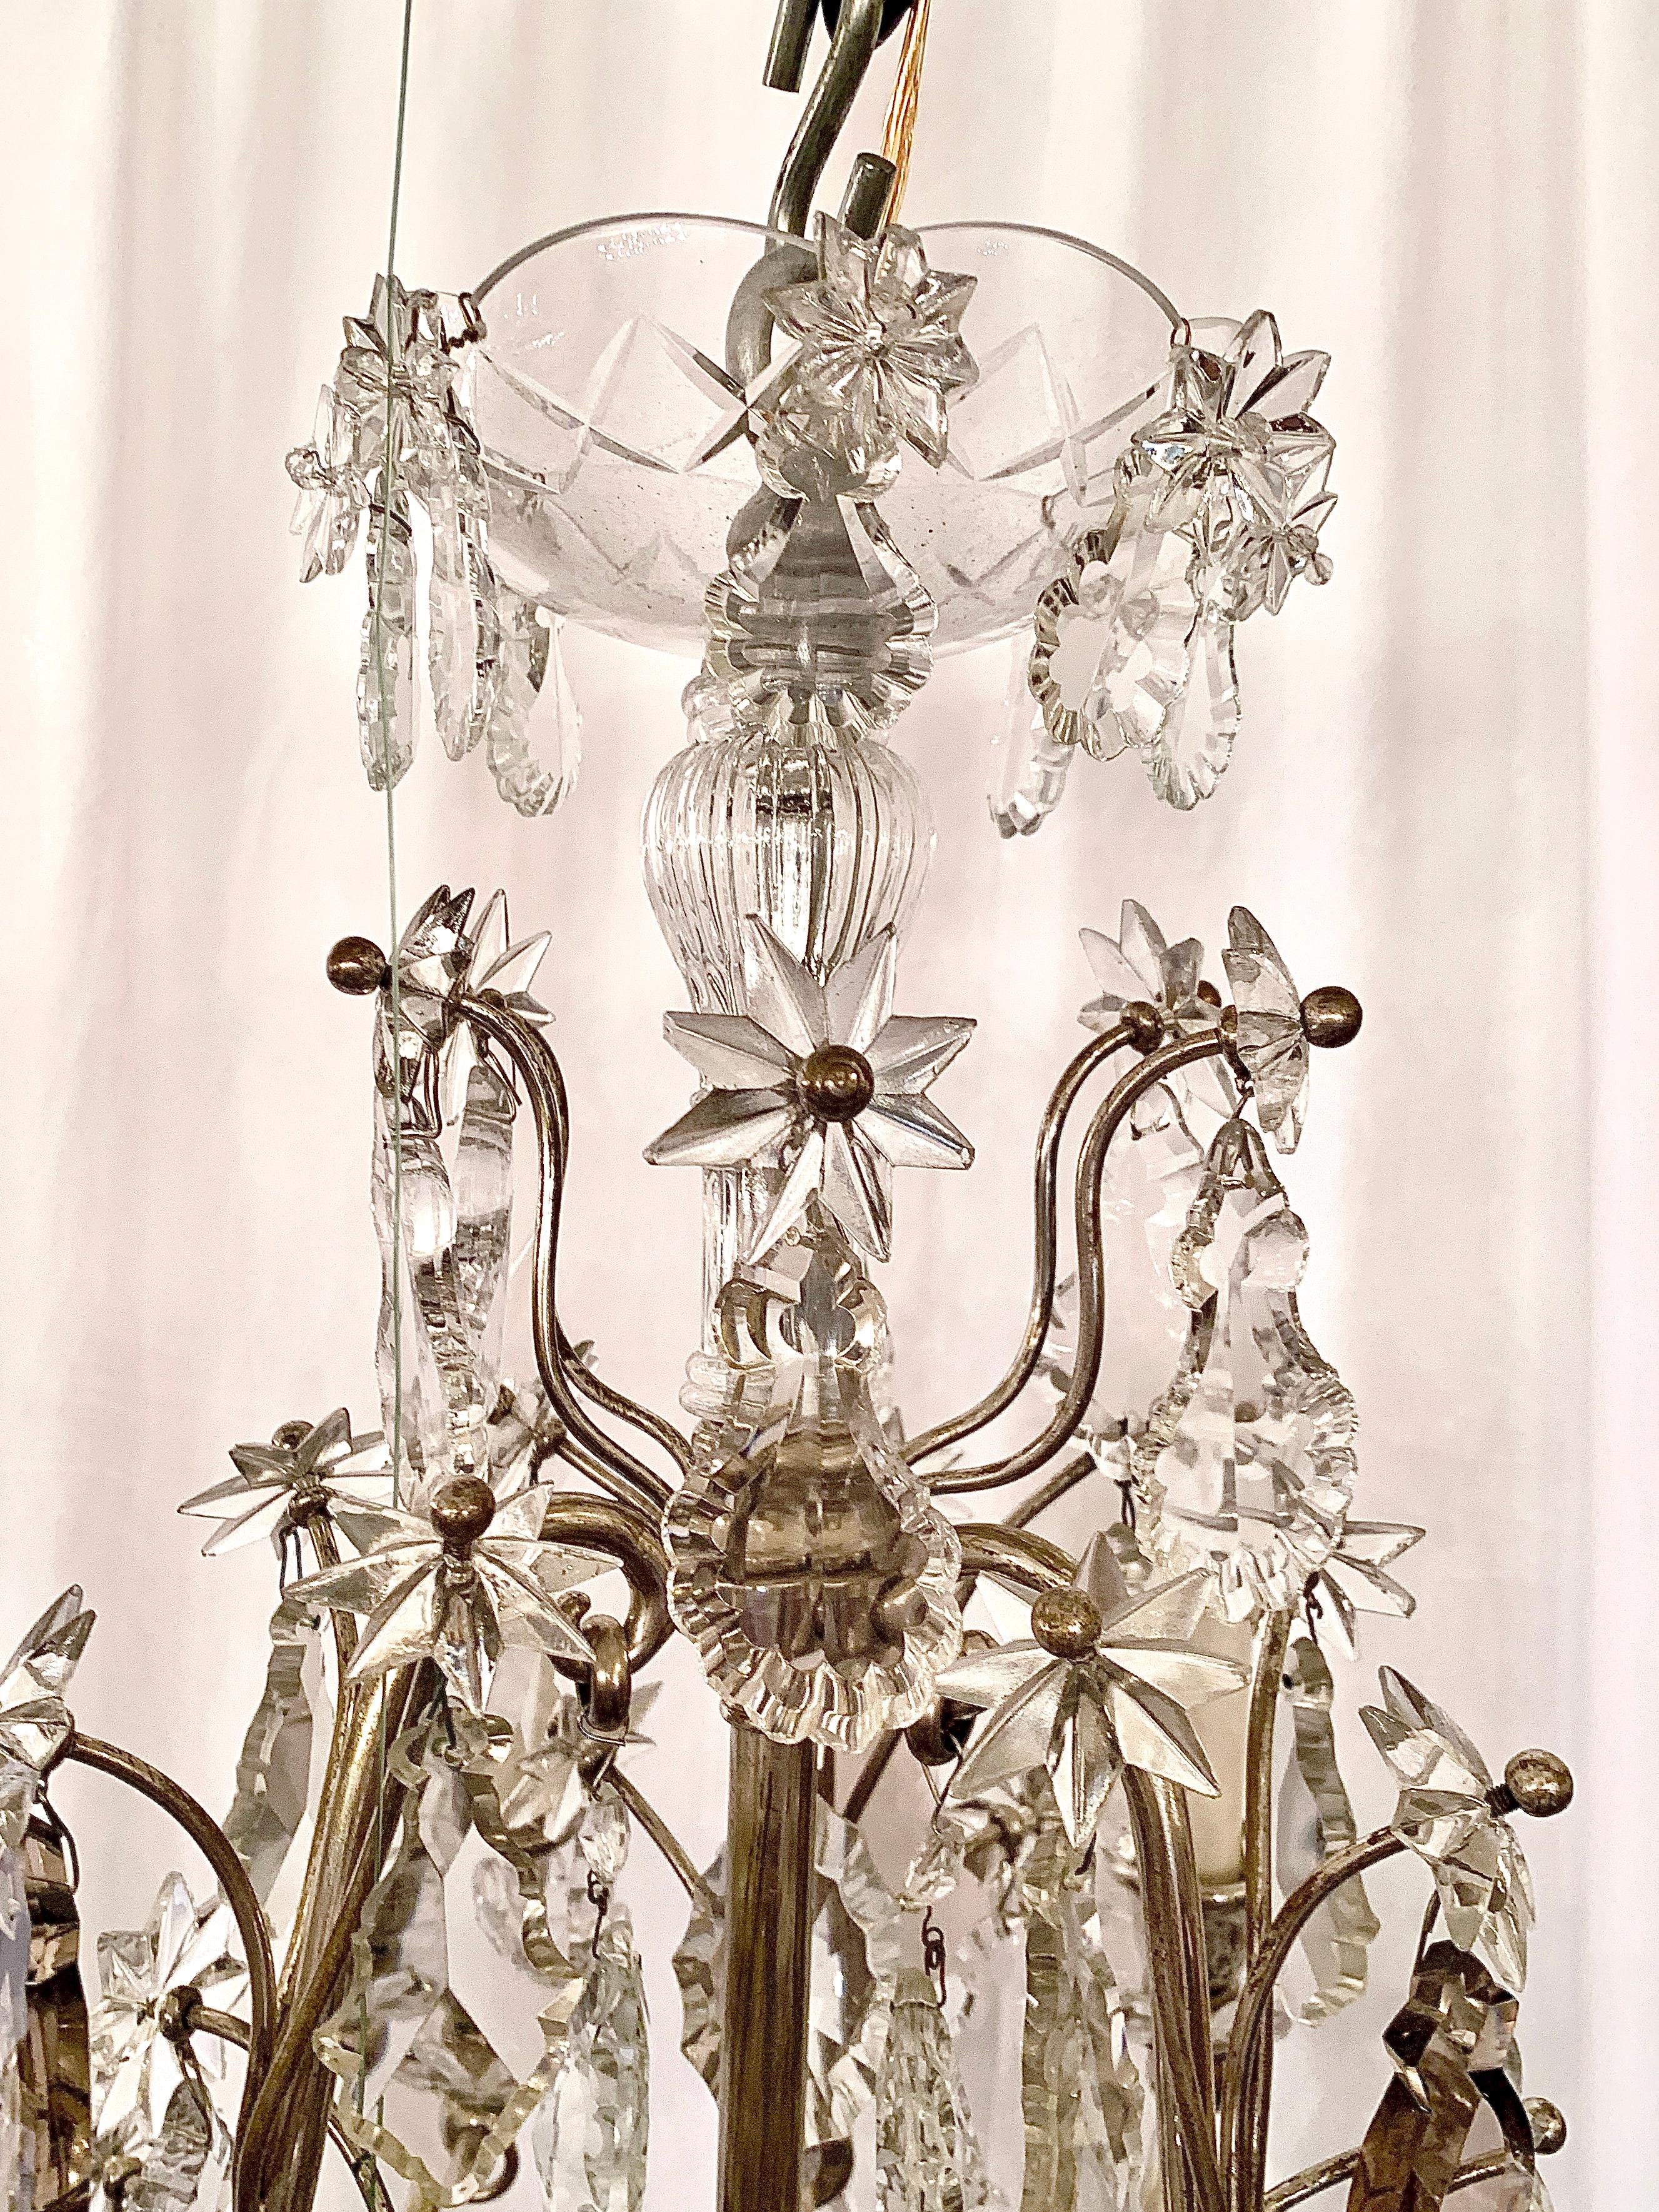 Antique French Baccarat crystal silvered bronze chandelier, circa 1900-1920.